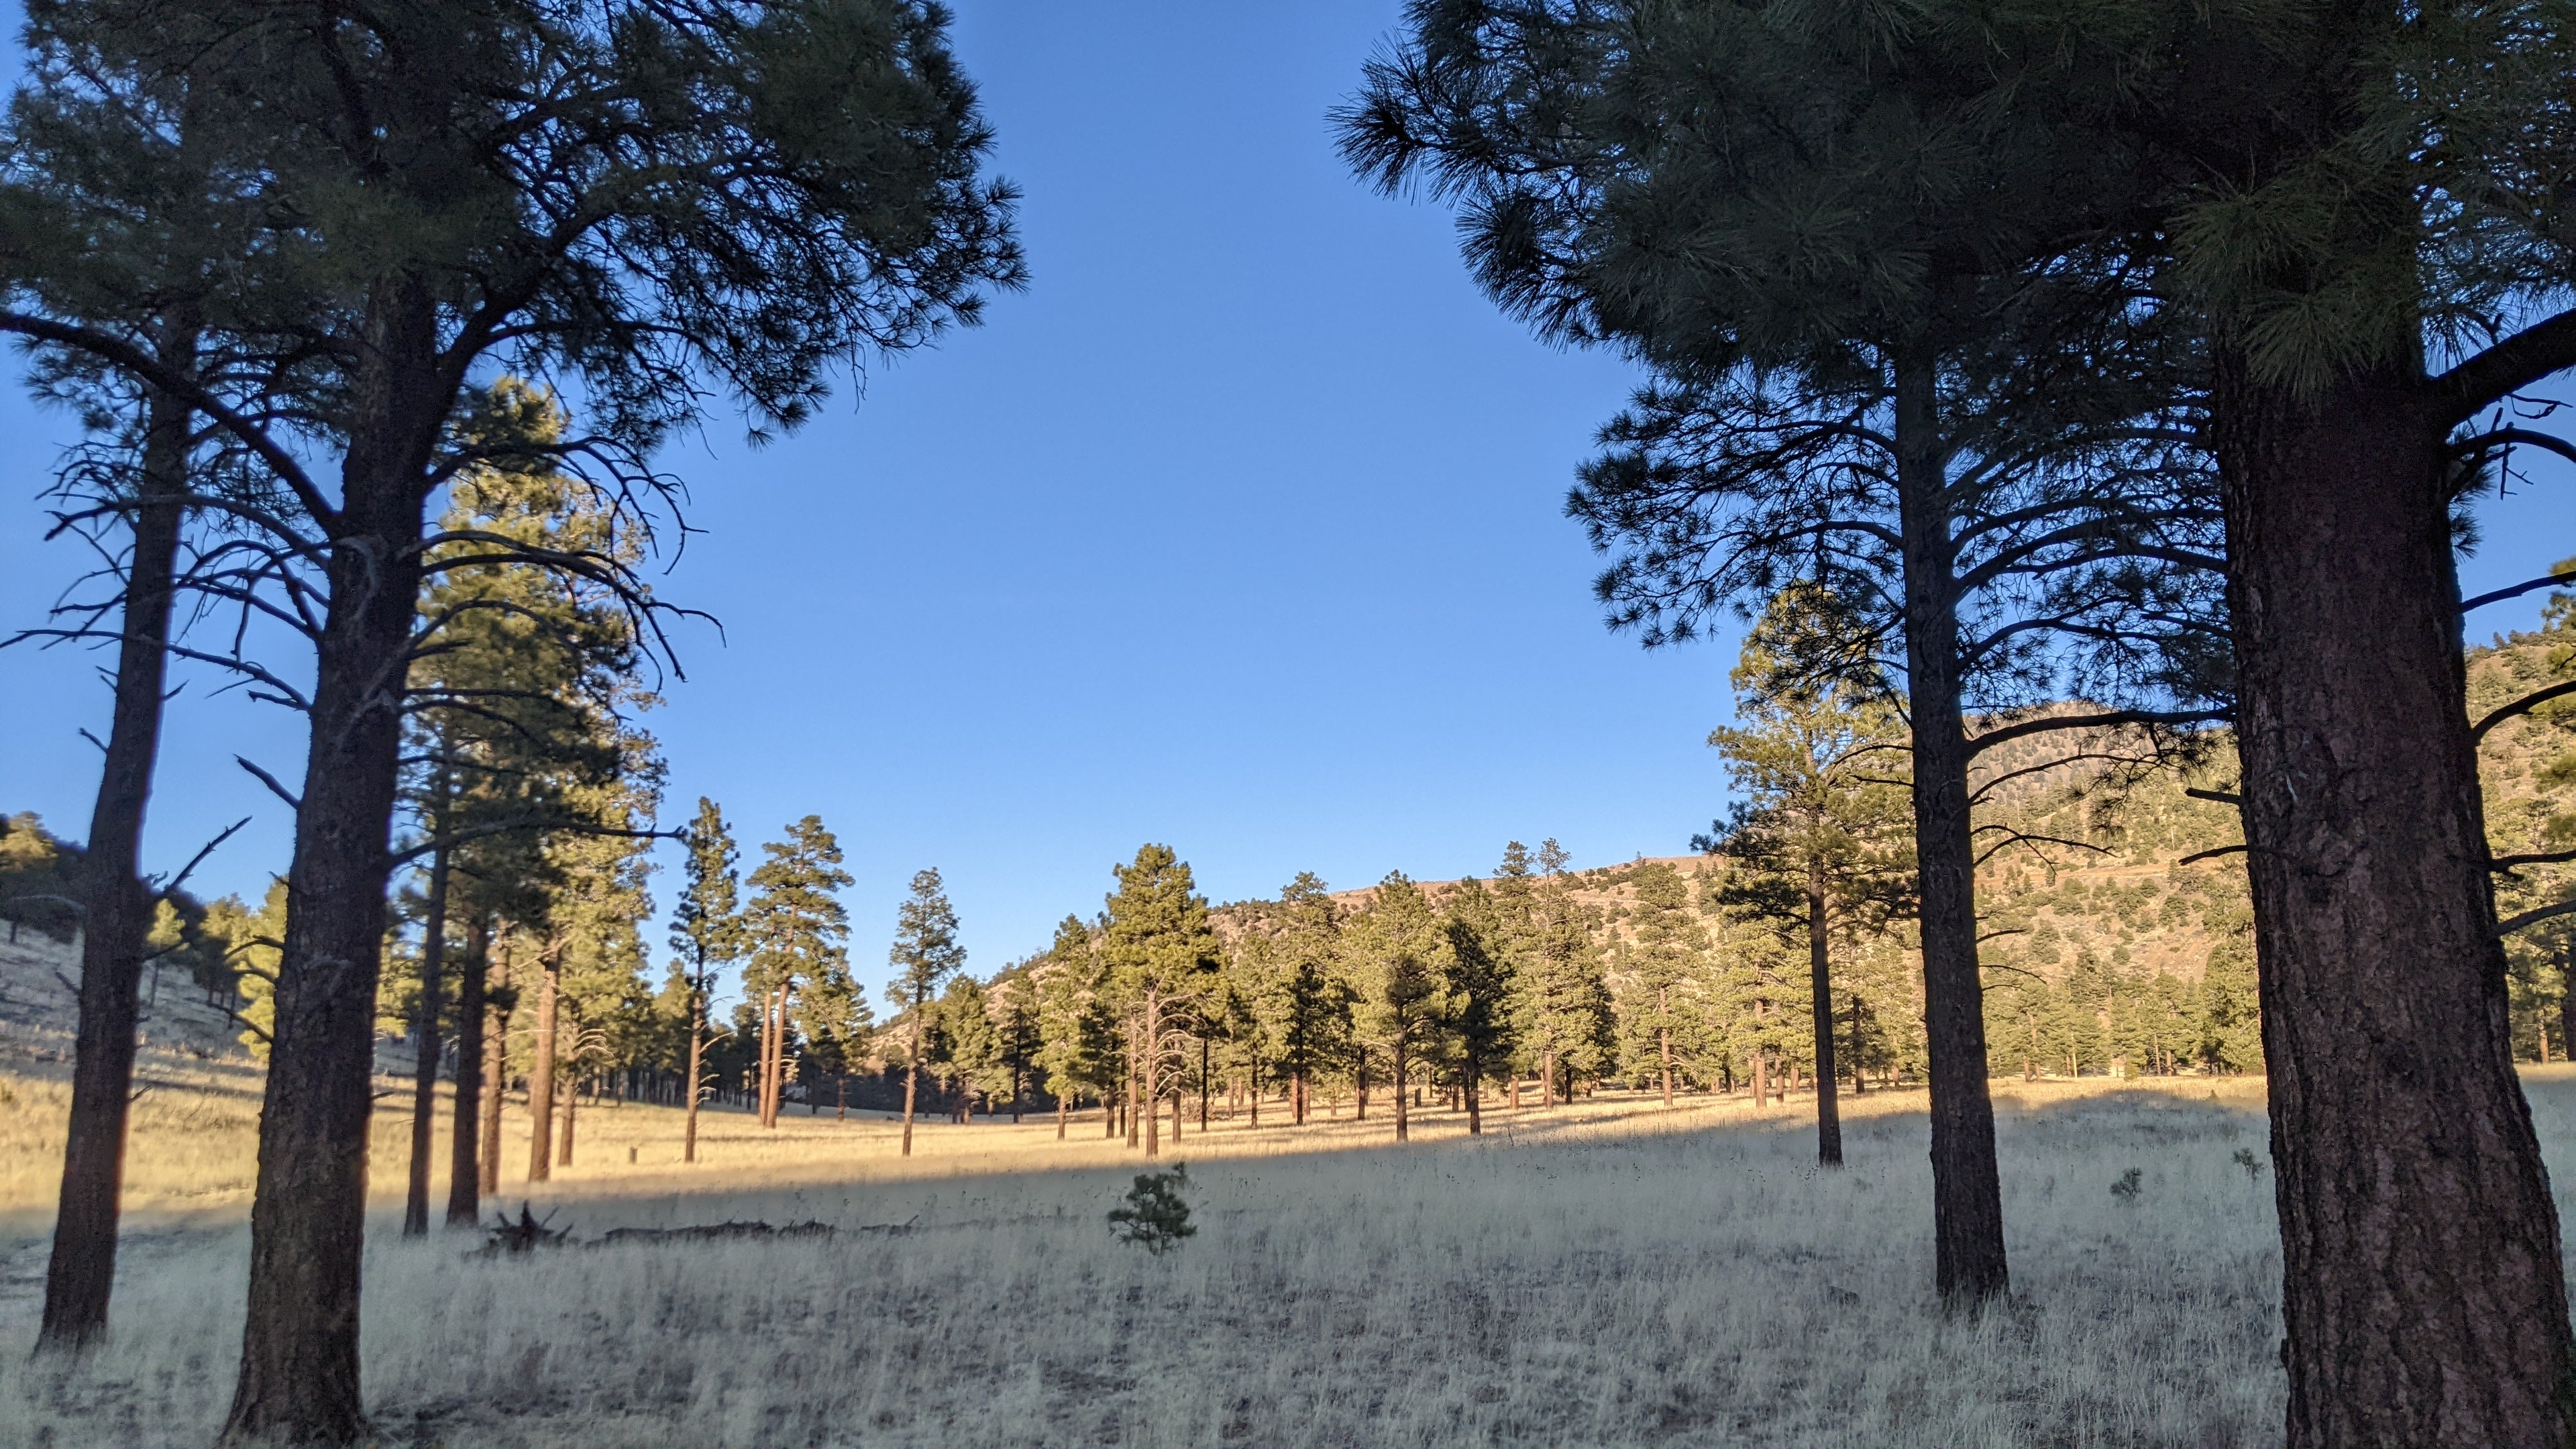 Camper submitted image from Dispersed Camping around Sunset Crater Volcano NM - 2